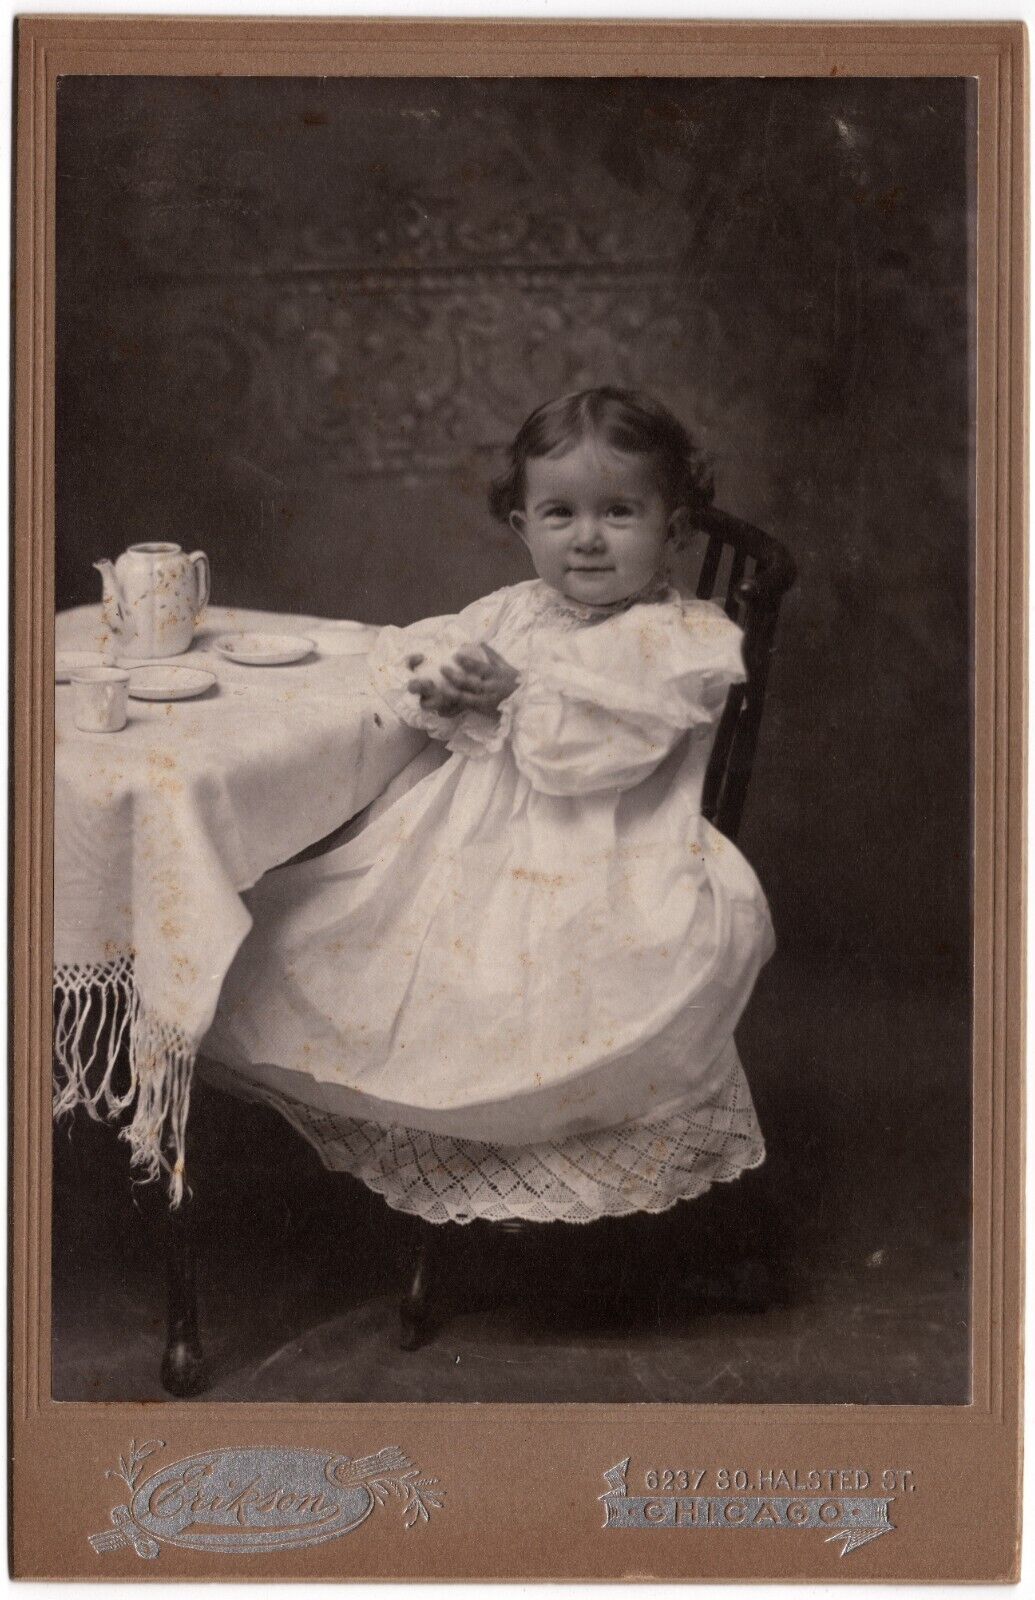 CIRCA 1890s CABINET CARD ERIKSON CUTE YOUNG GIRL WITH TEASET CHICAGO ILLINOIS